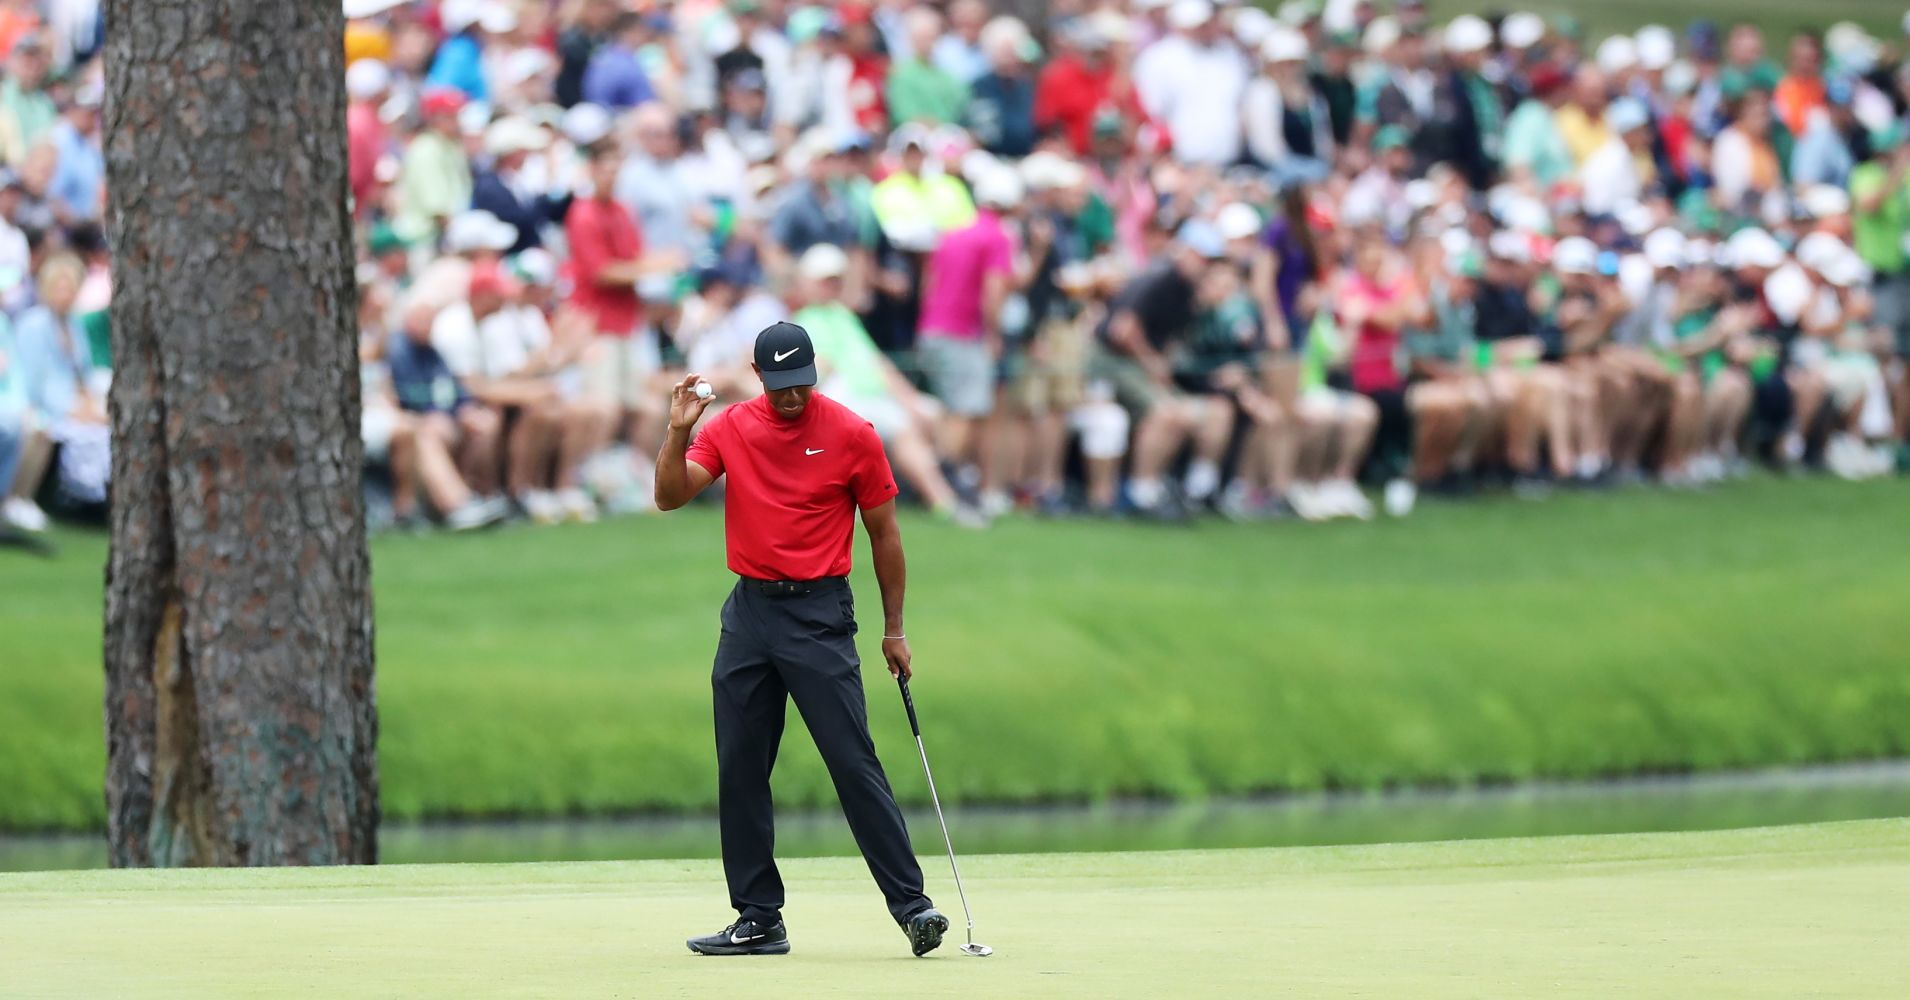 Tiger Woods of the United States reacts on the 15th green during the final round of the Masters at Augusta National Golf Club on April 14, 2019 in Augusta, Georgia.